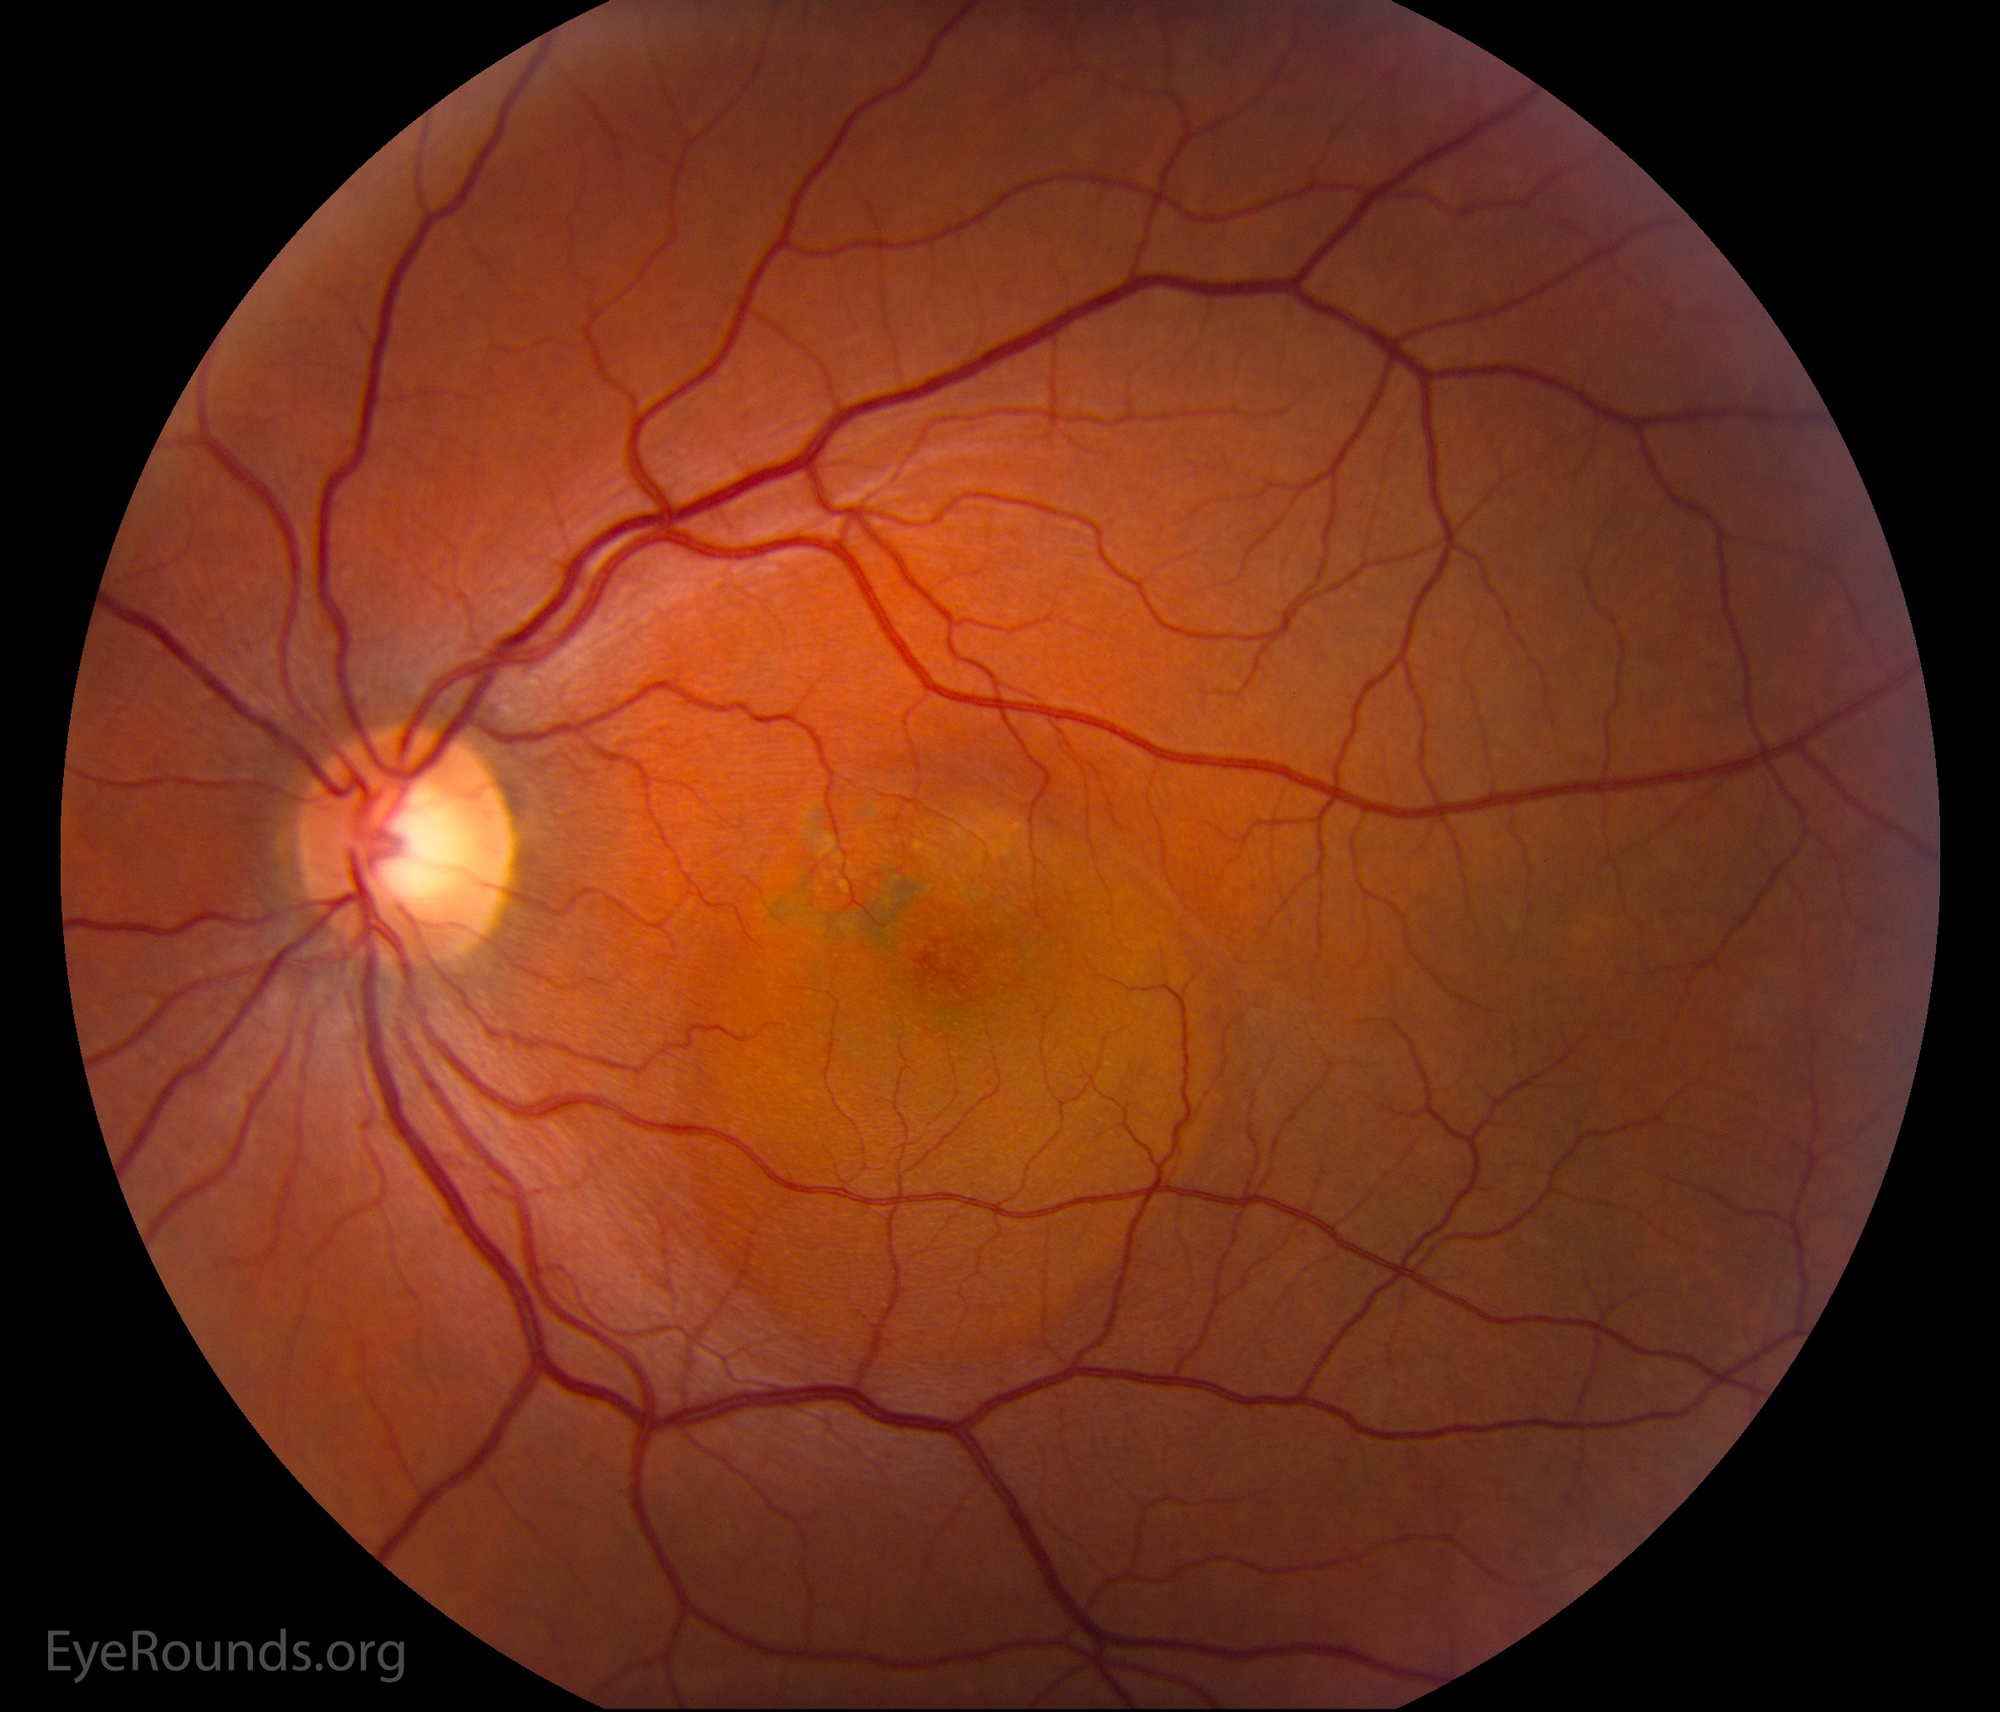 This color fundus photograph demonstrates subretinal fluid involving the fovea